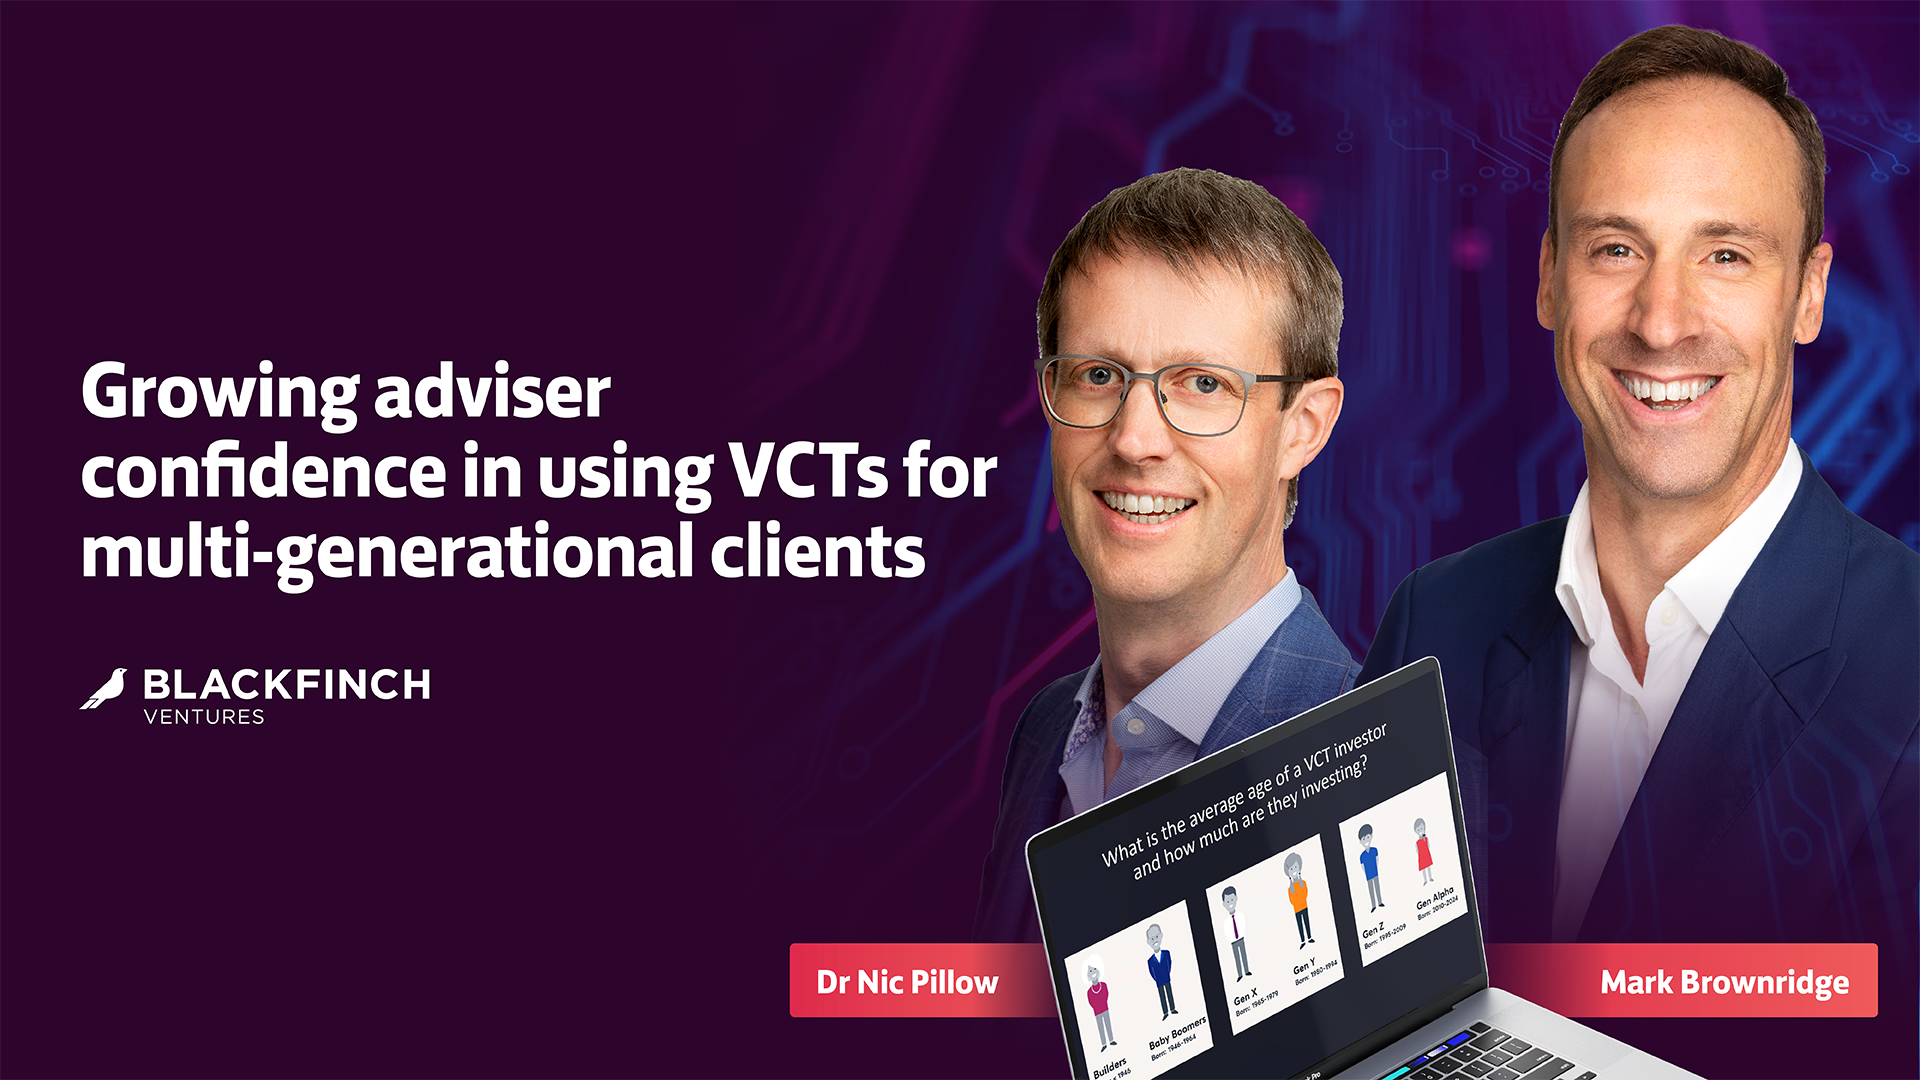 thumnail-Growing adviser confidence in using VCTs for multi-generational clients.png